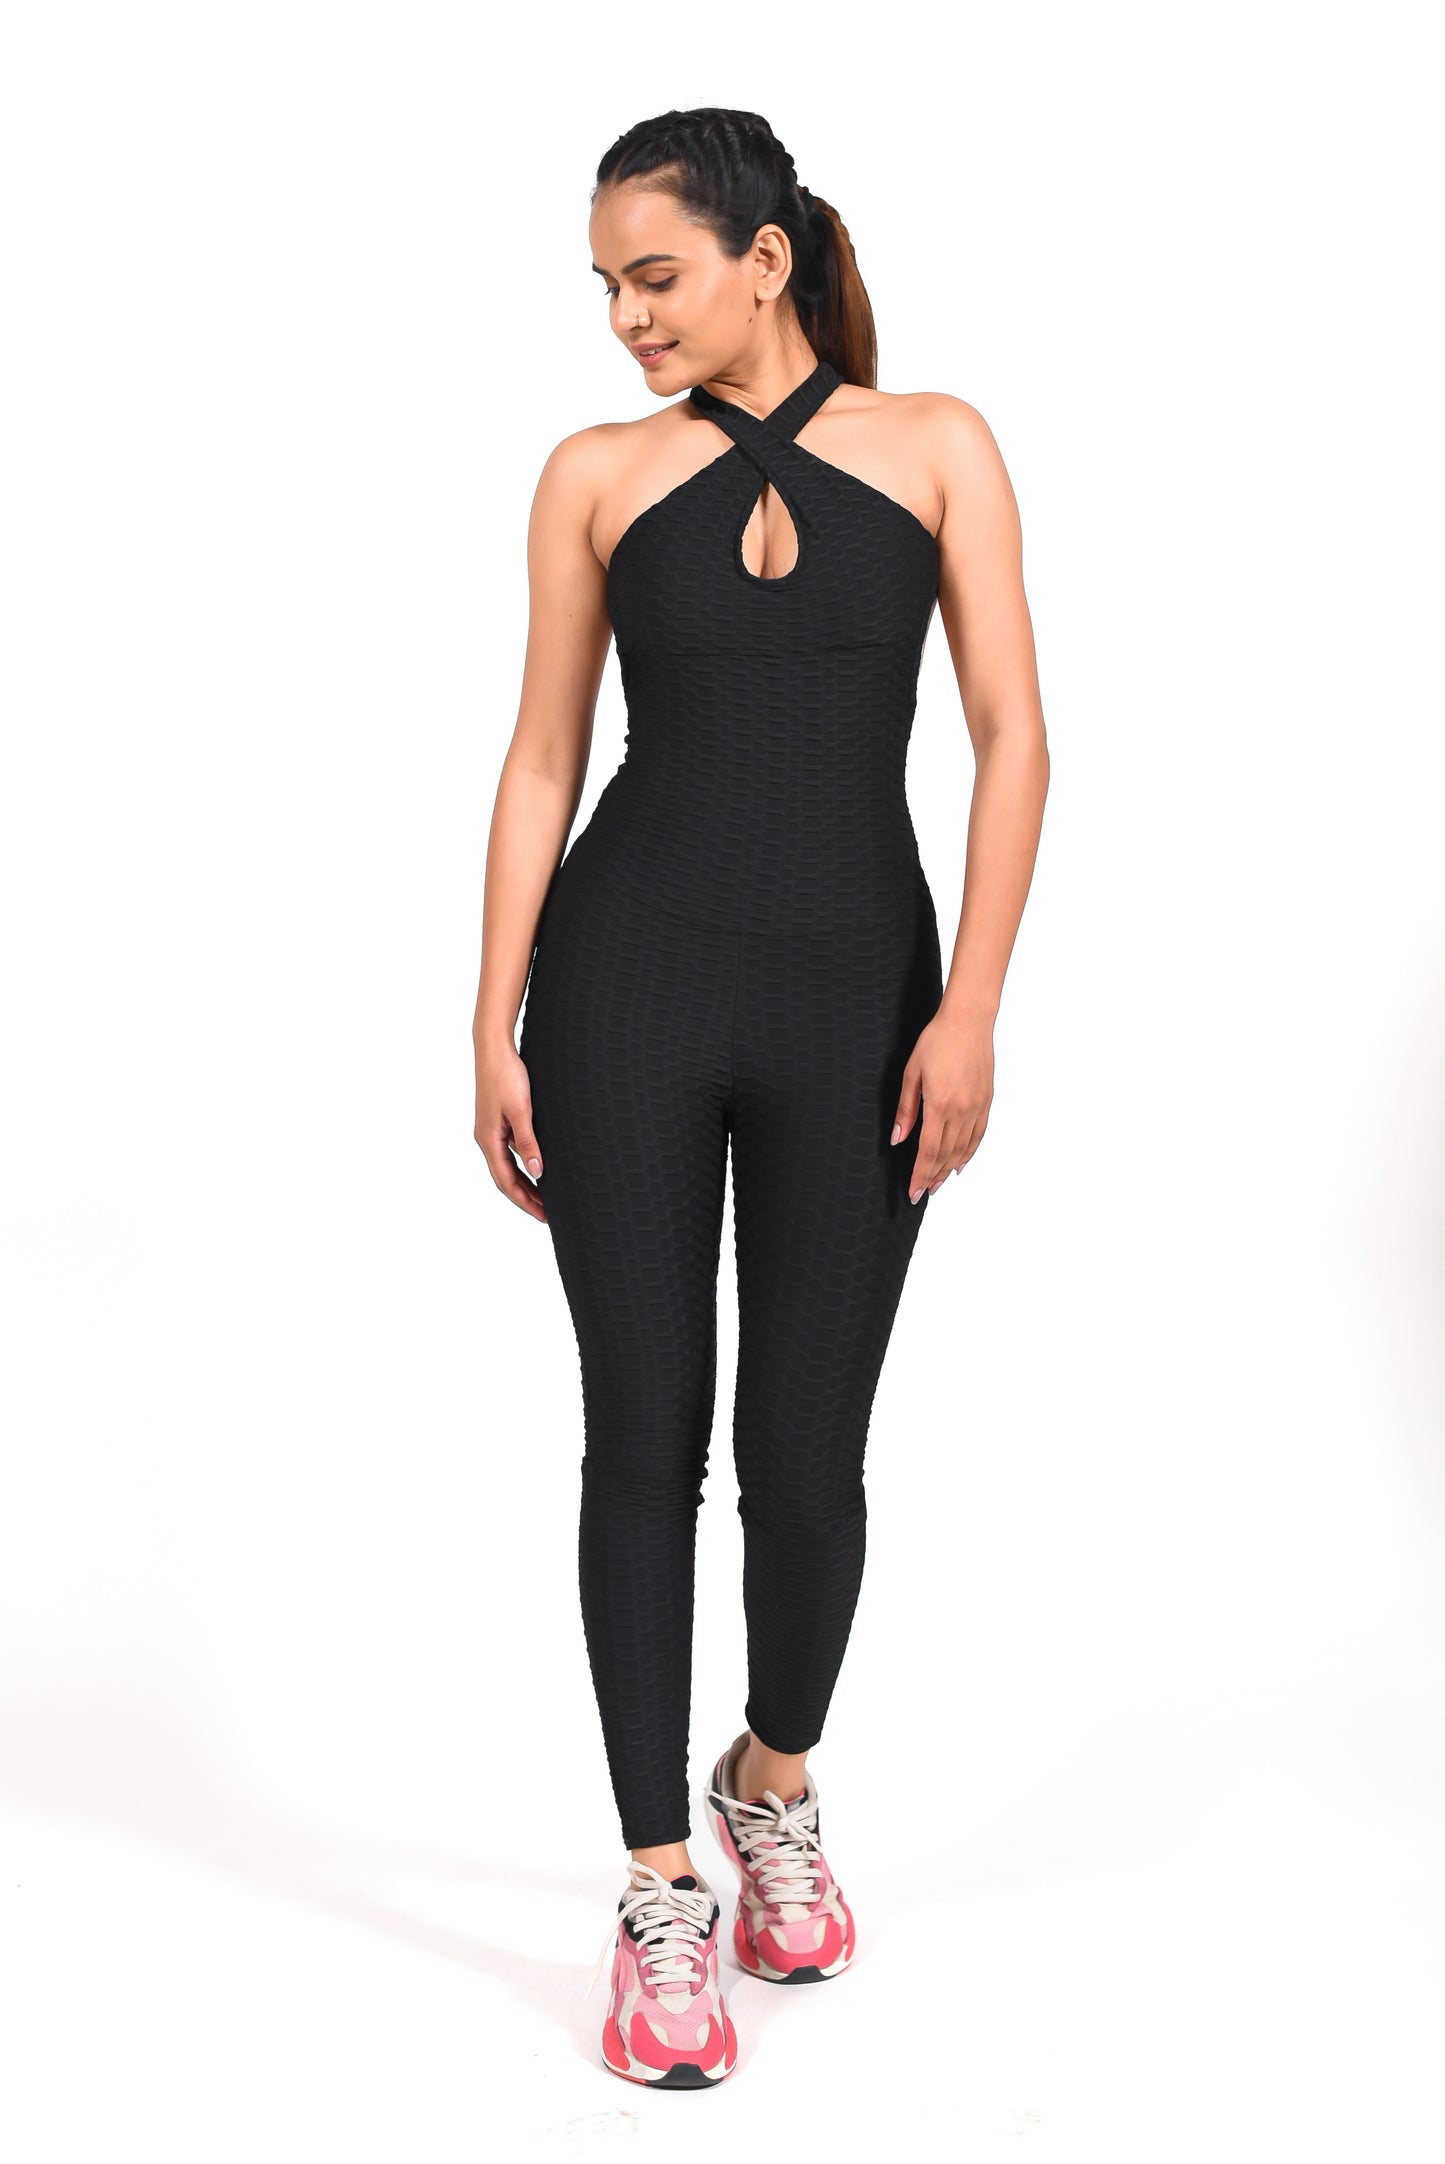 Load image into Gallery viewer, GYMSQUAD® ANTI-CELLULITE AND PUSH UP JUMPSUIT - BLACK
